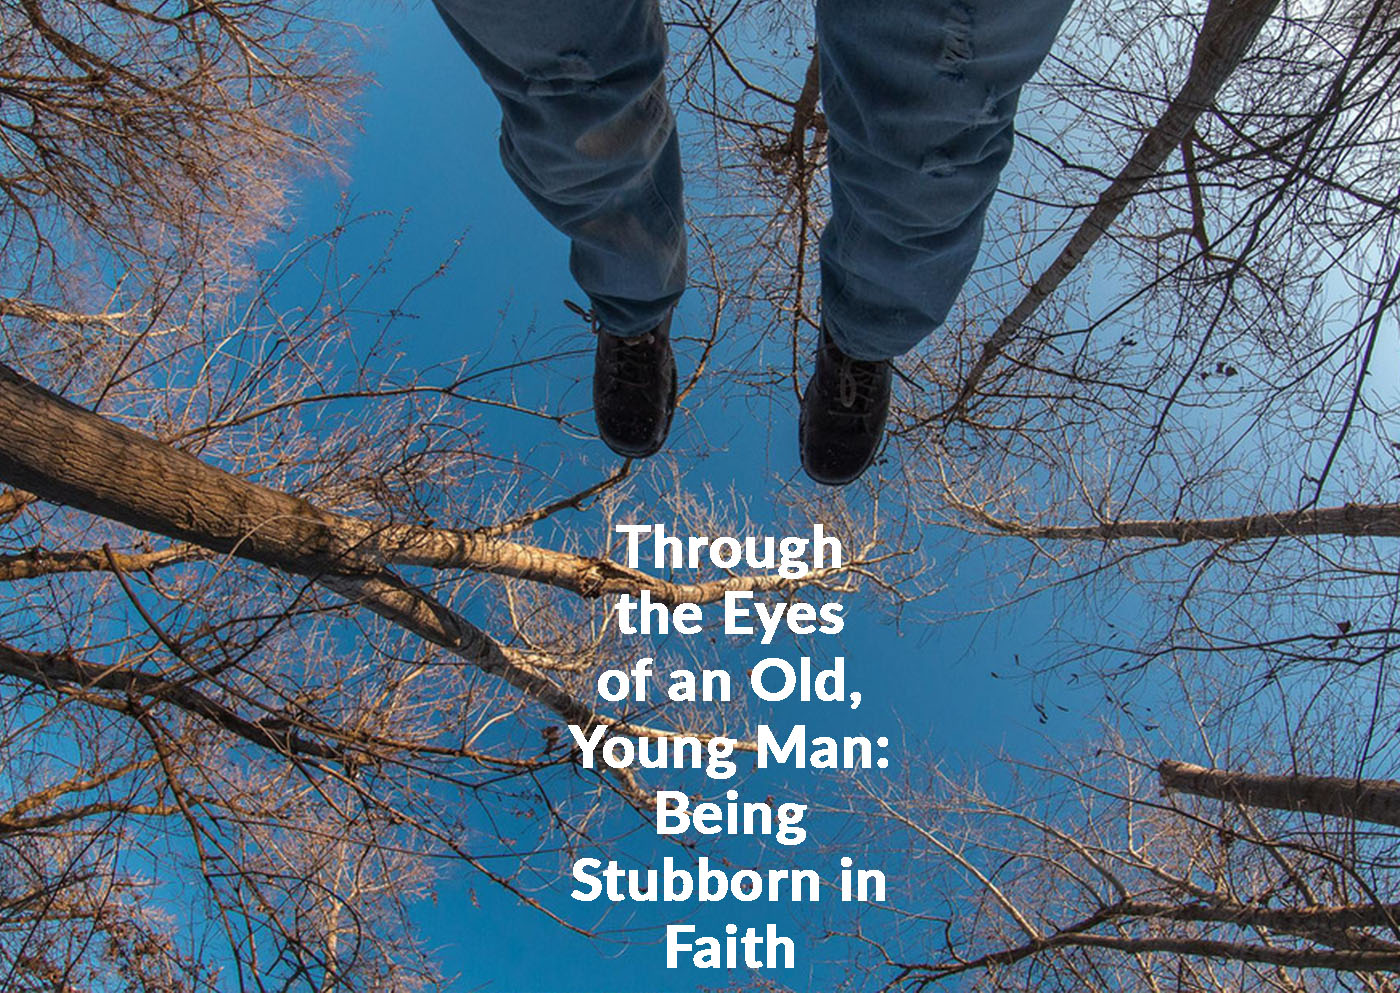 Through the Eyes of an Old, Young Man: Being Stubborn in Faith